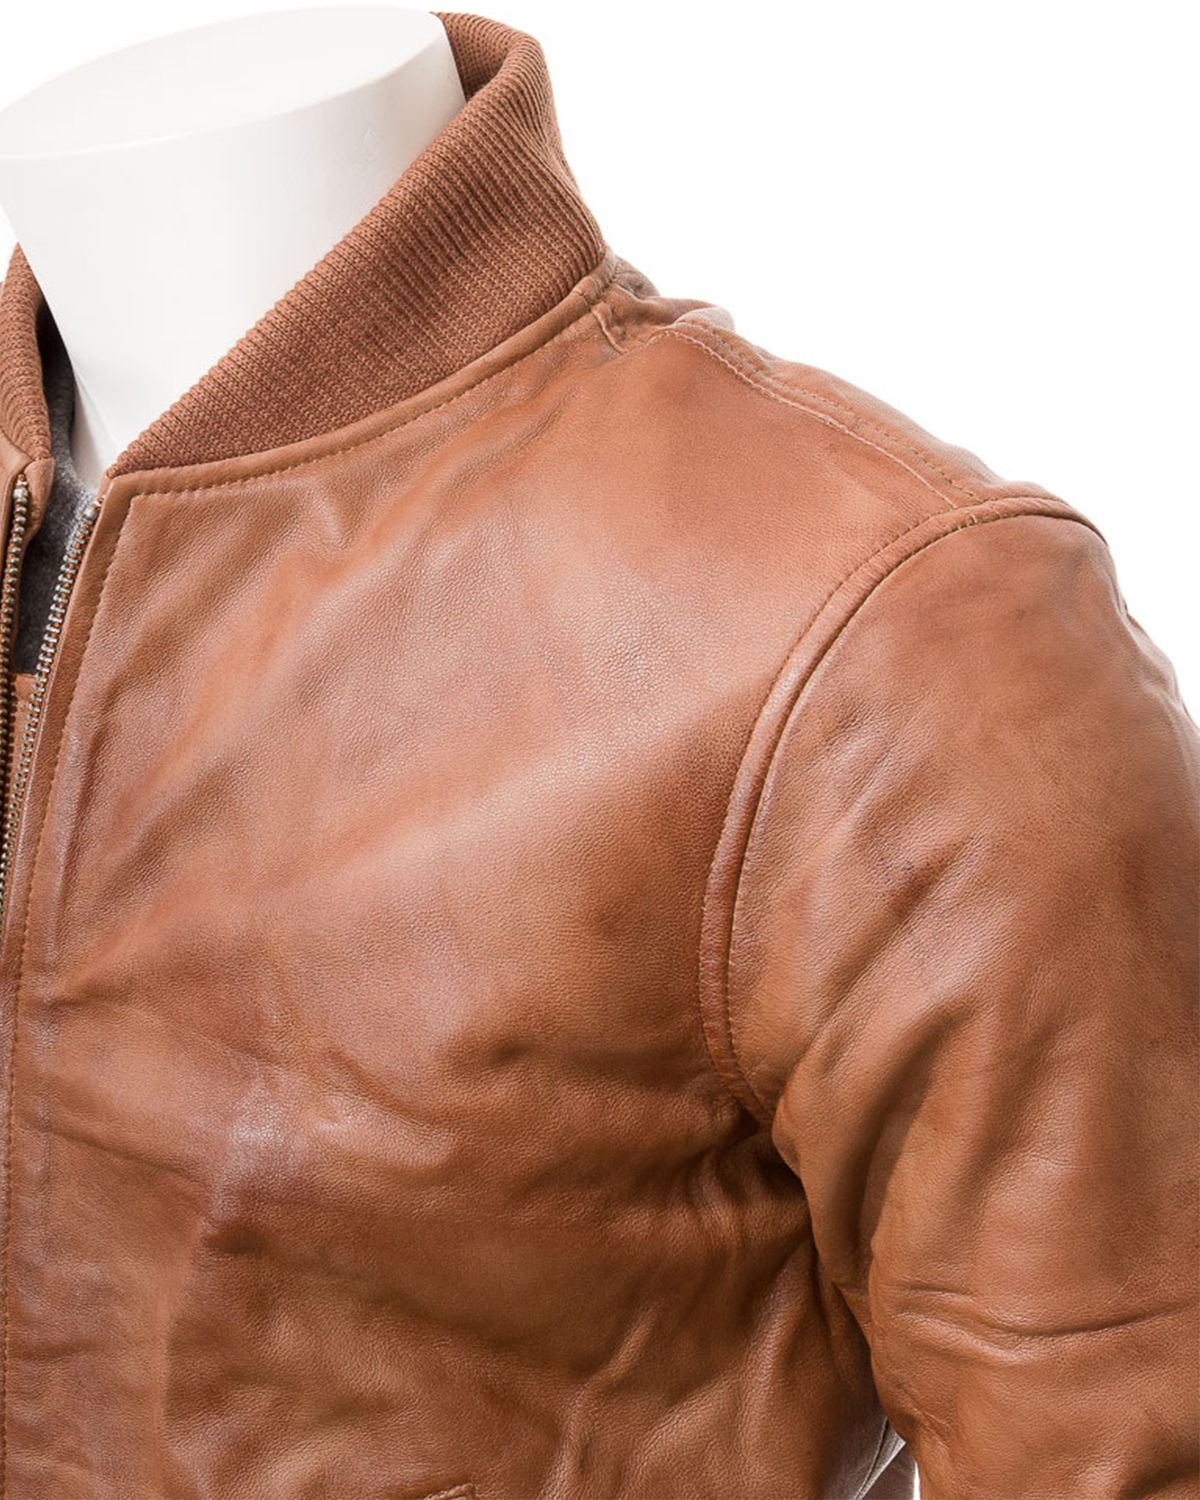 MotorCycleJackets Men's Ribbed Cuffs Tan Brown Bomber Real Leather Jacket